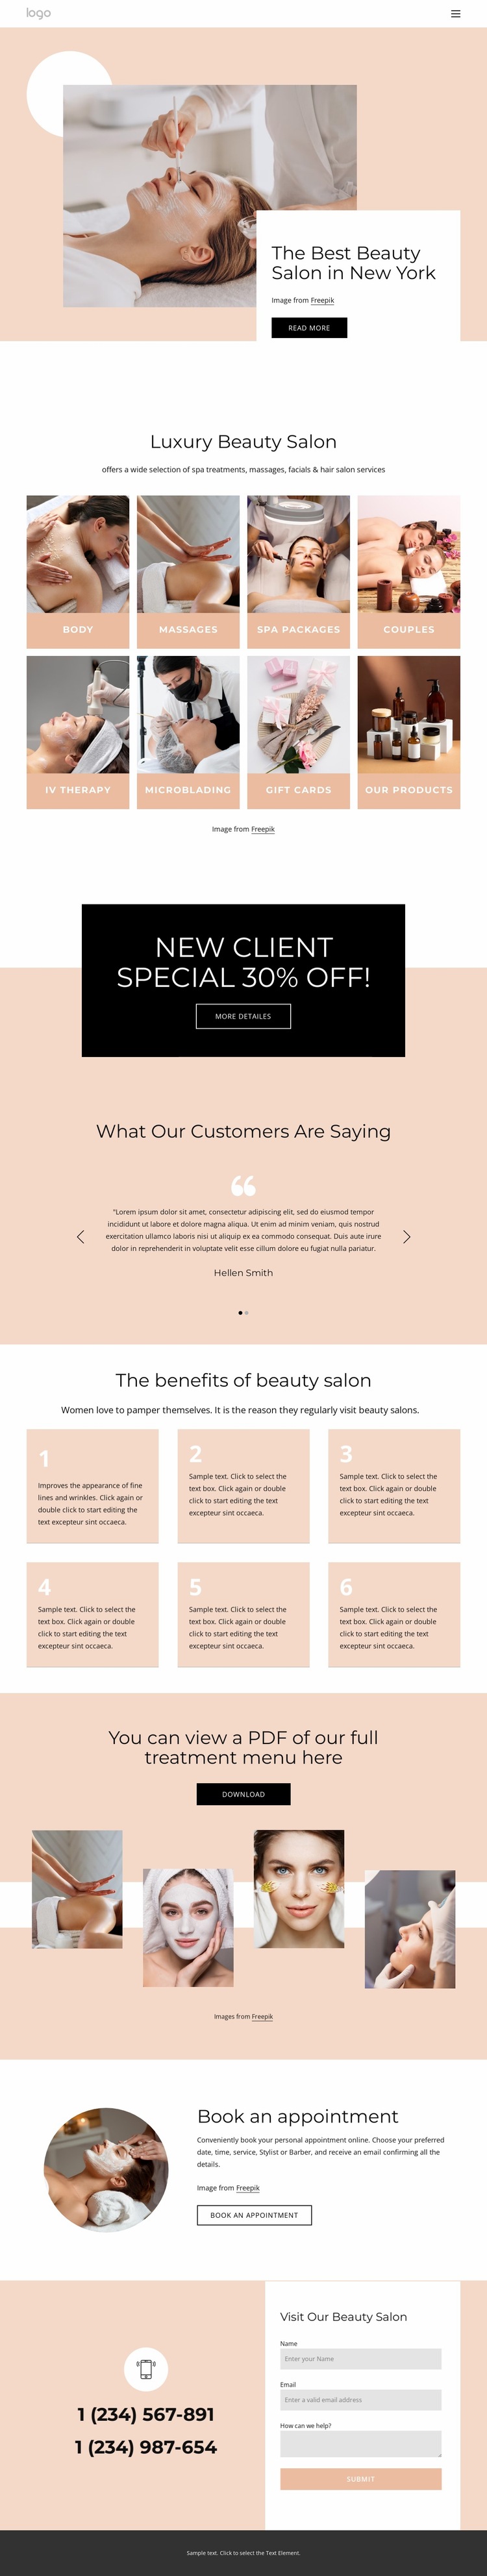 The best beauty salon in NYC Website Builder Templates